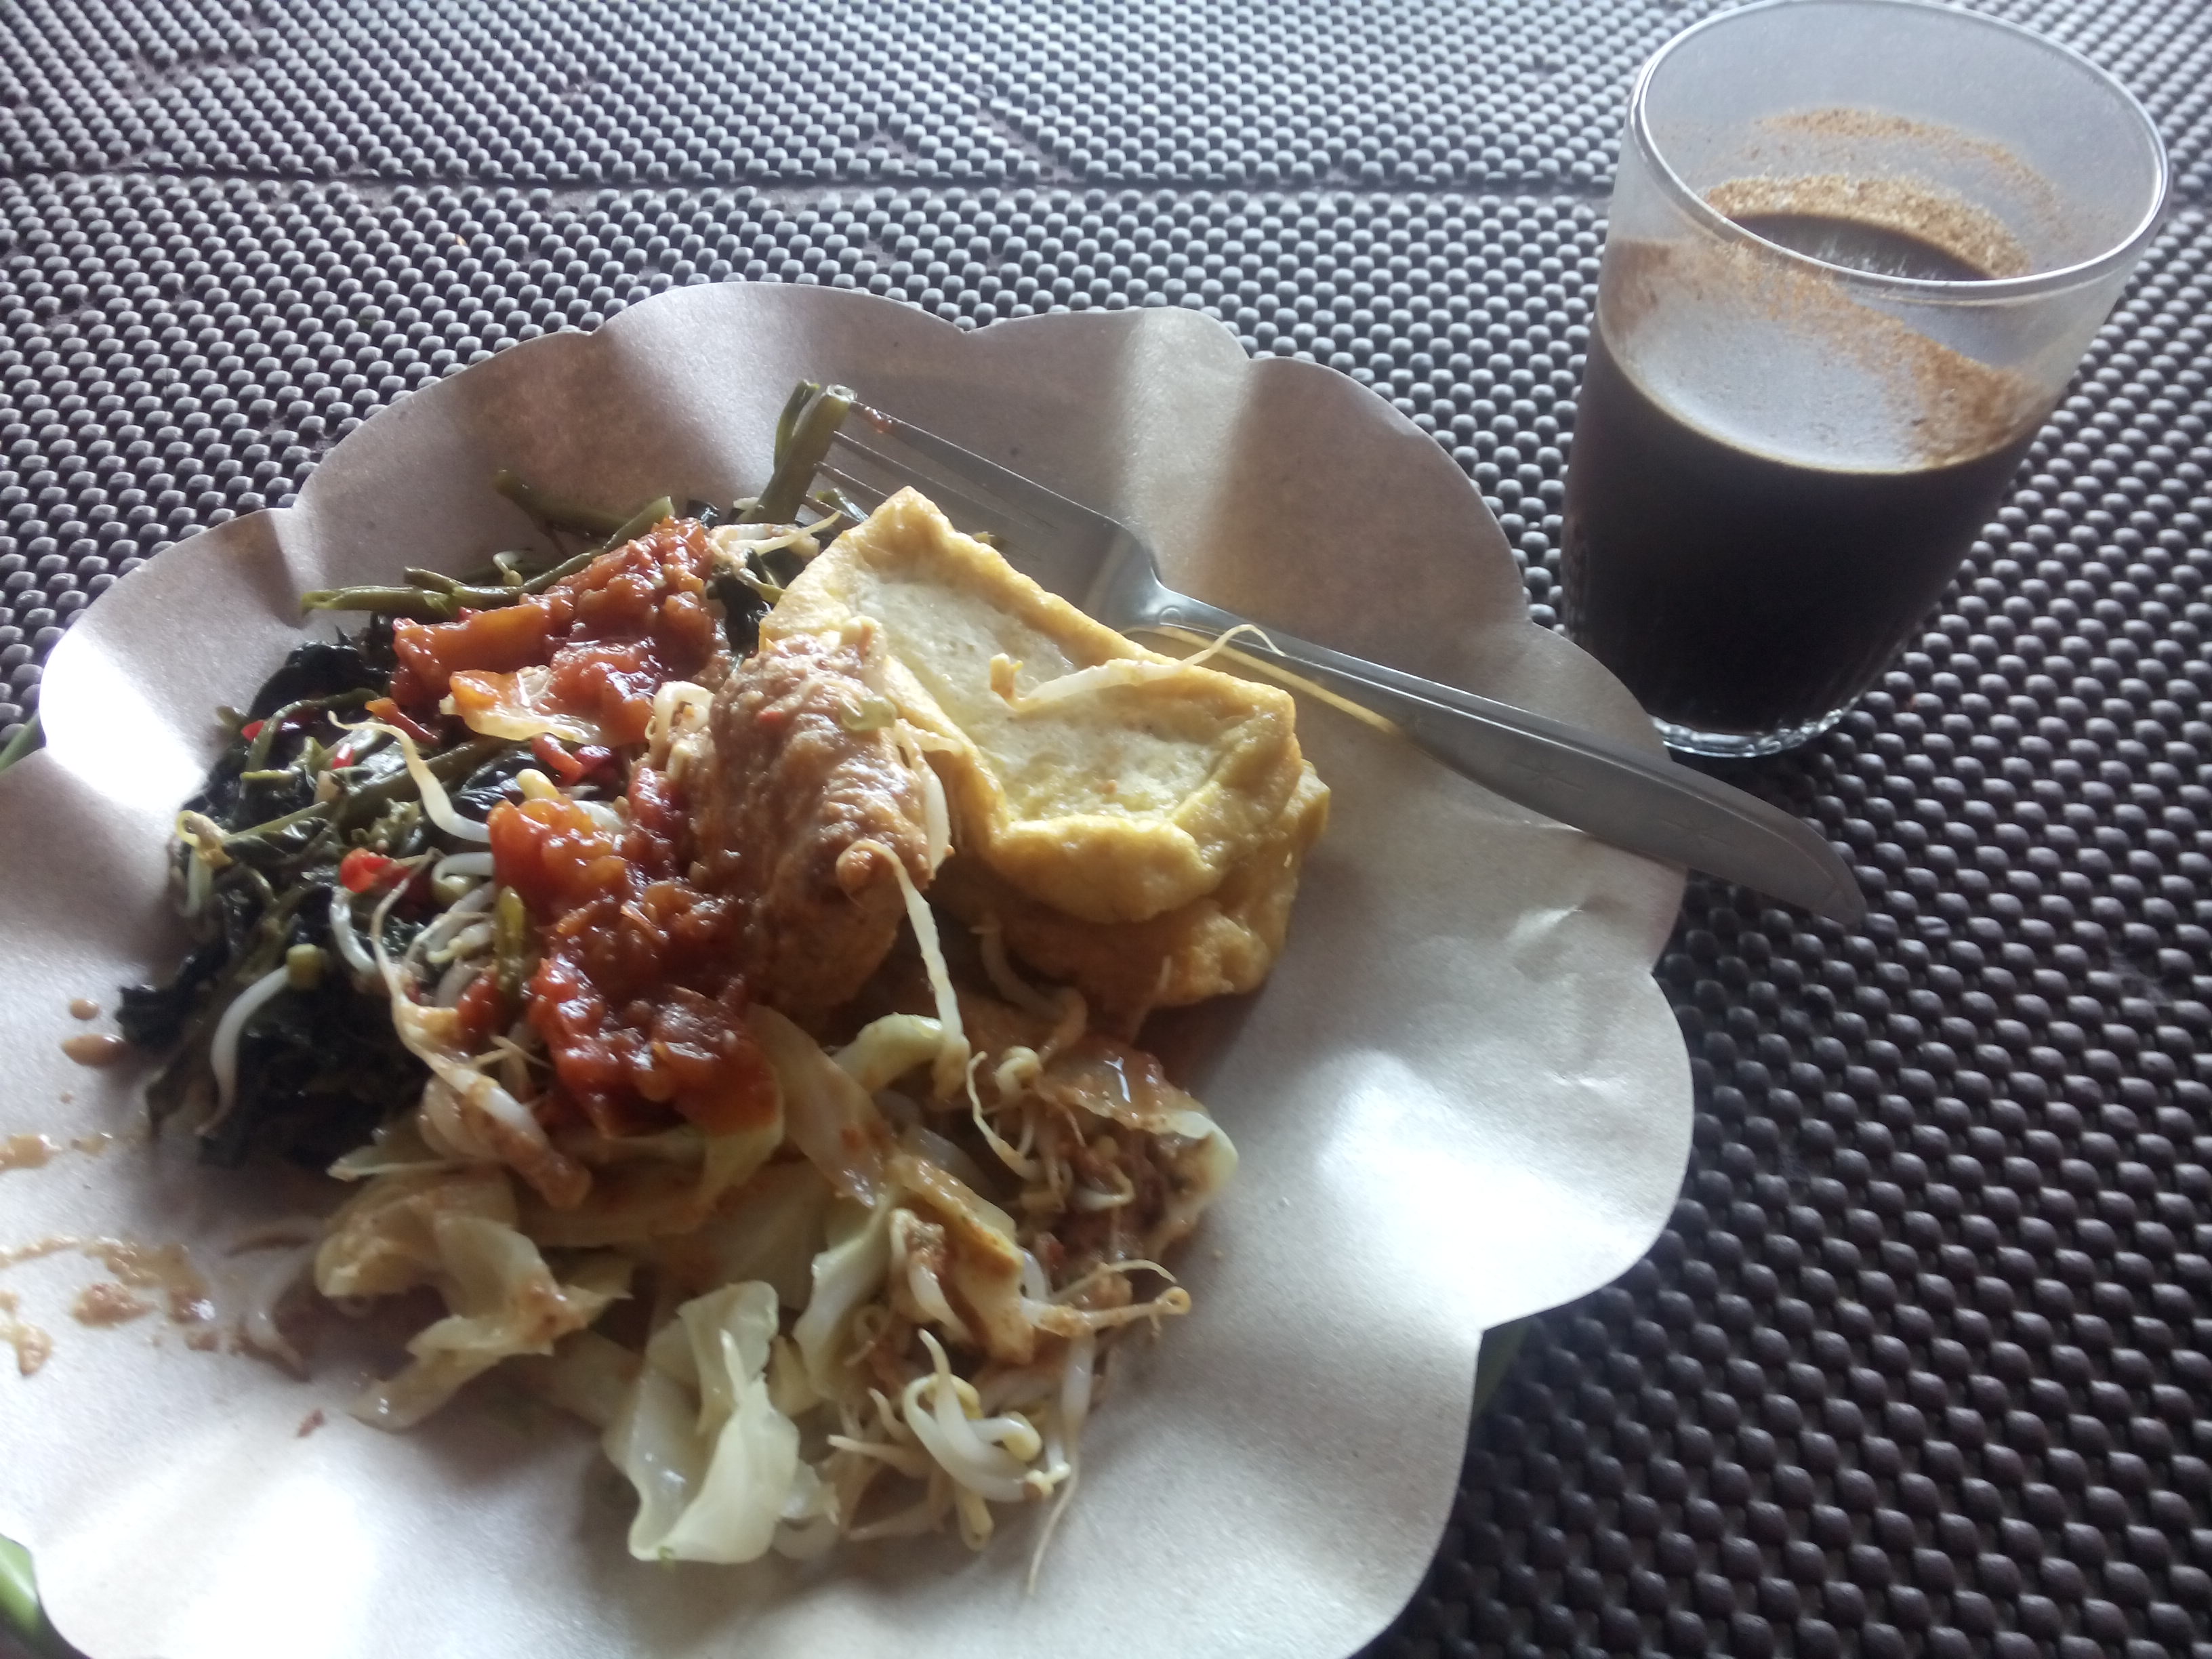 A plate of Indonesian food